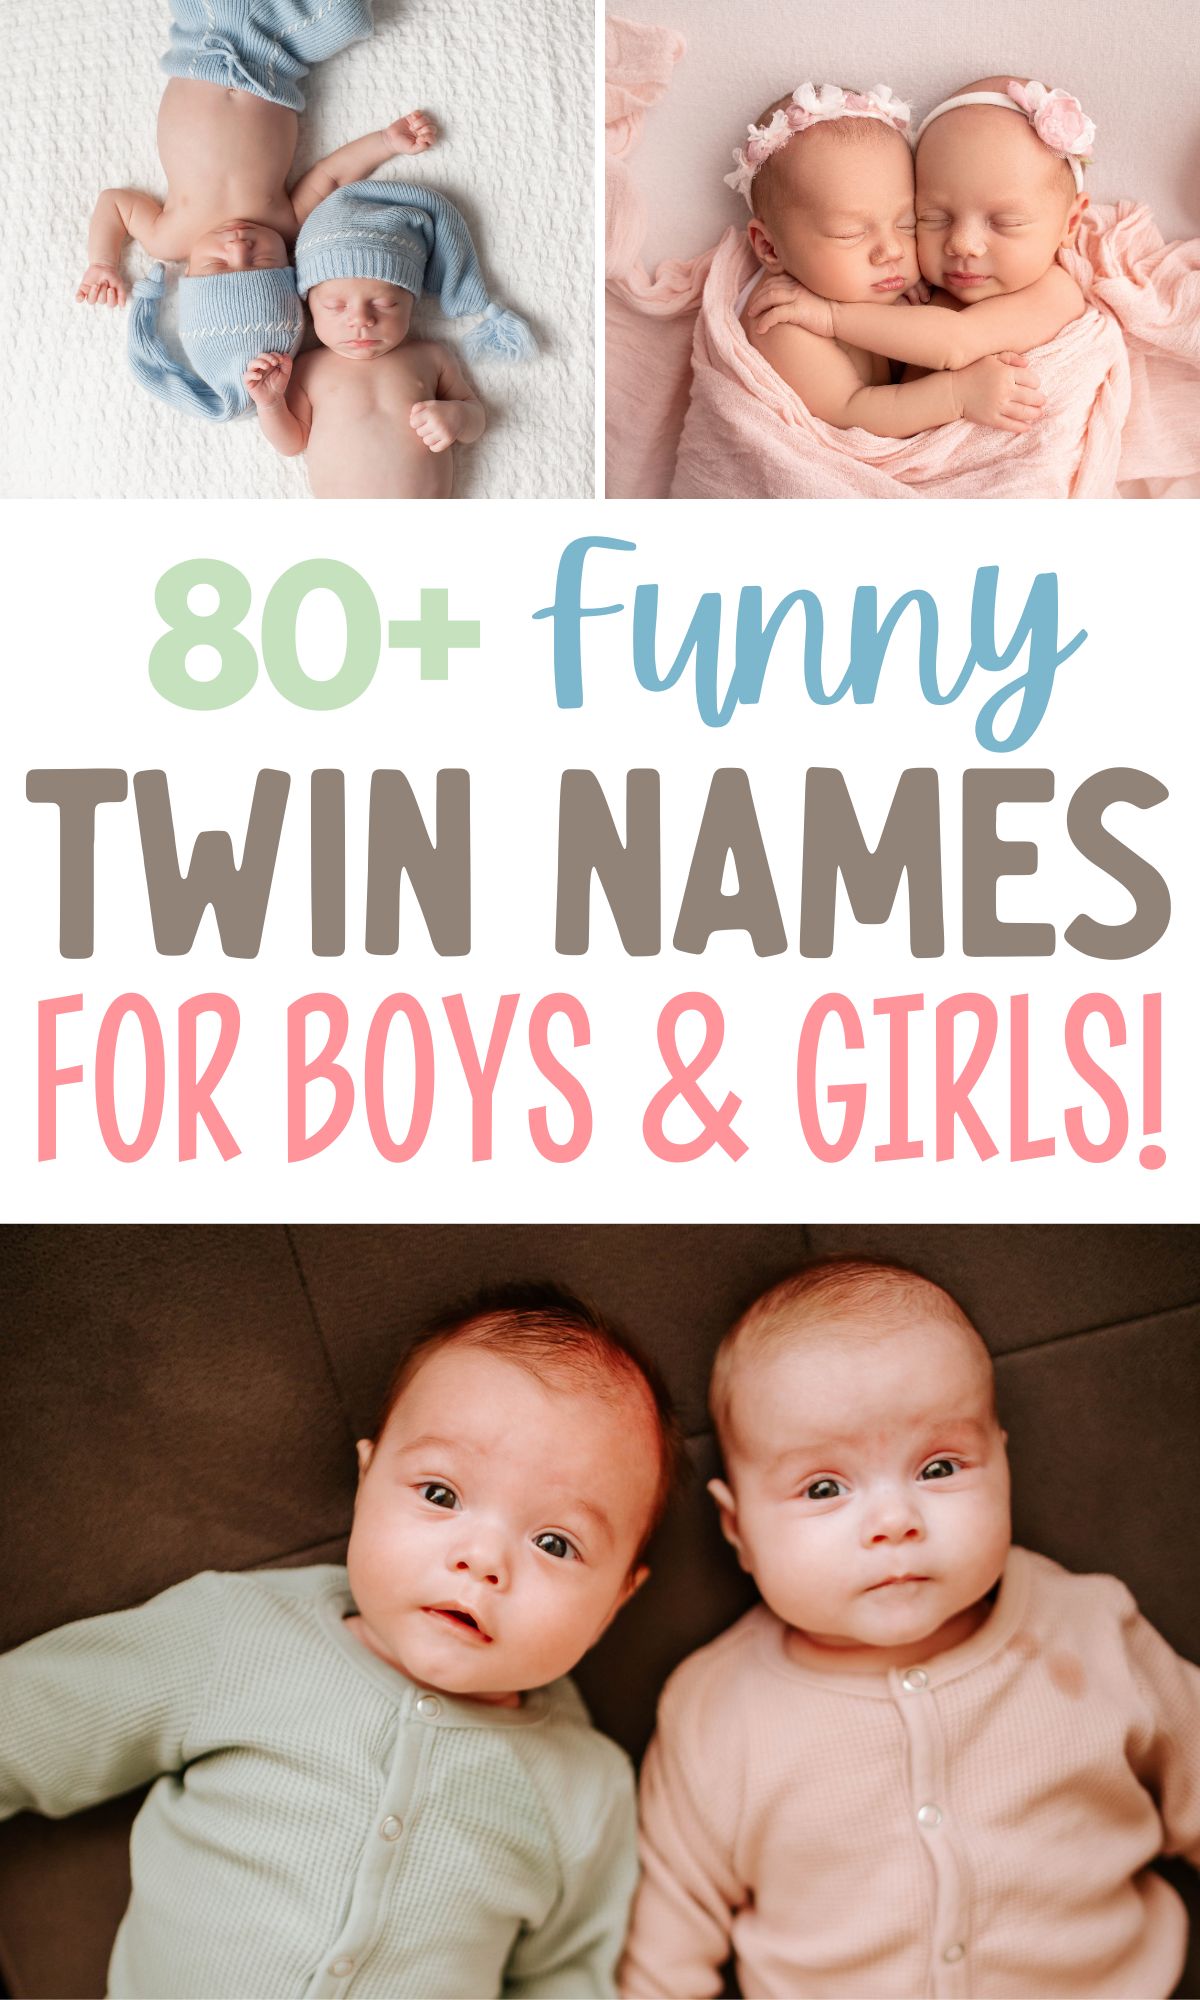 Image graphic with text that reads "80+ Funny Twin Names for Boys and Girls" and a collage of twin babies.